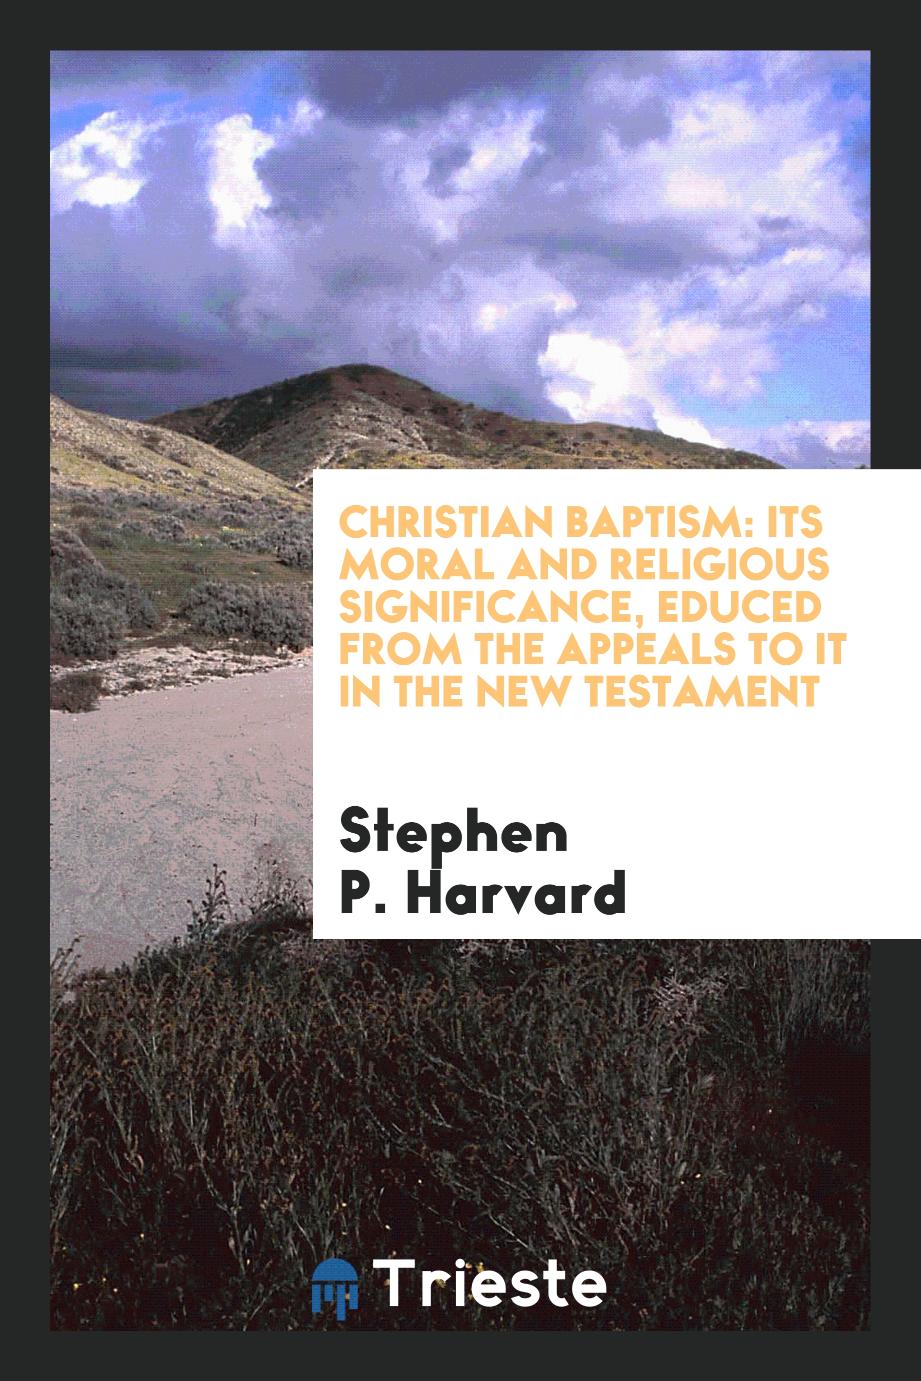 Christian baptism: its moral and religious significance, educed from the appeals to it in the new testament